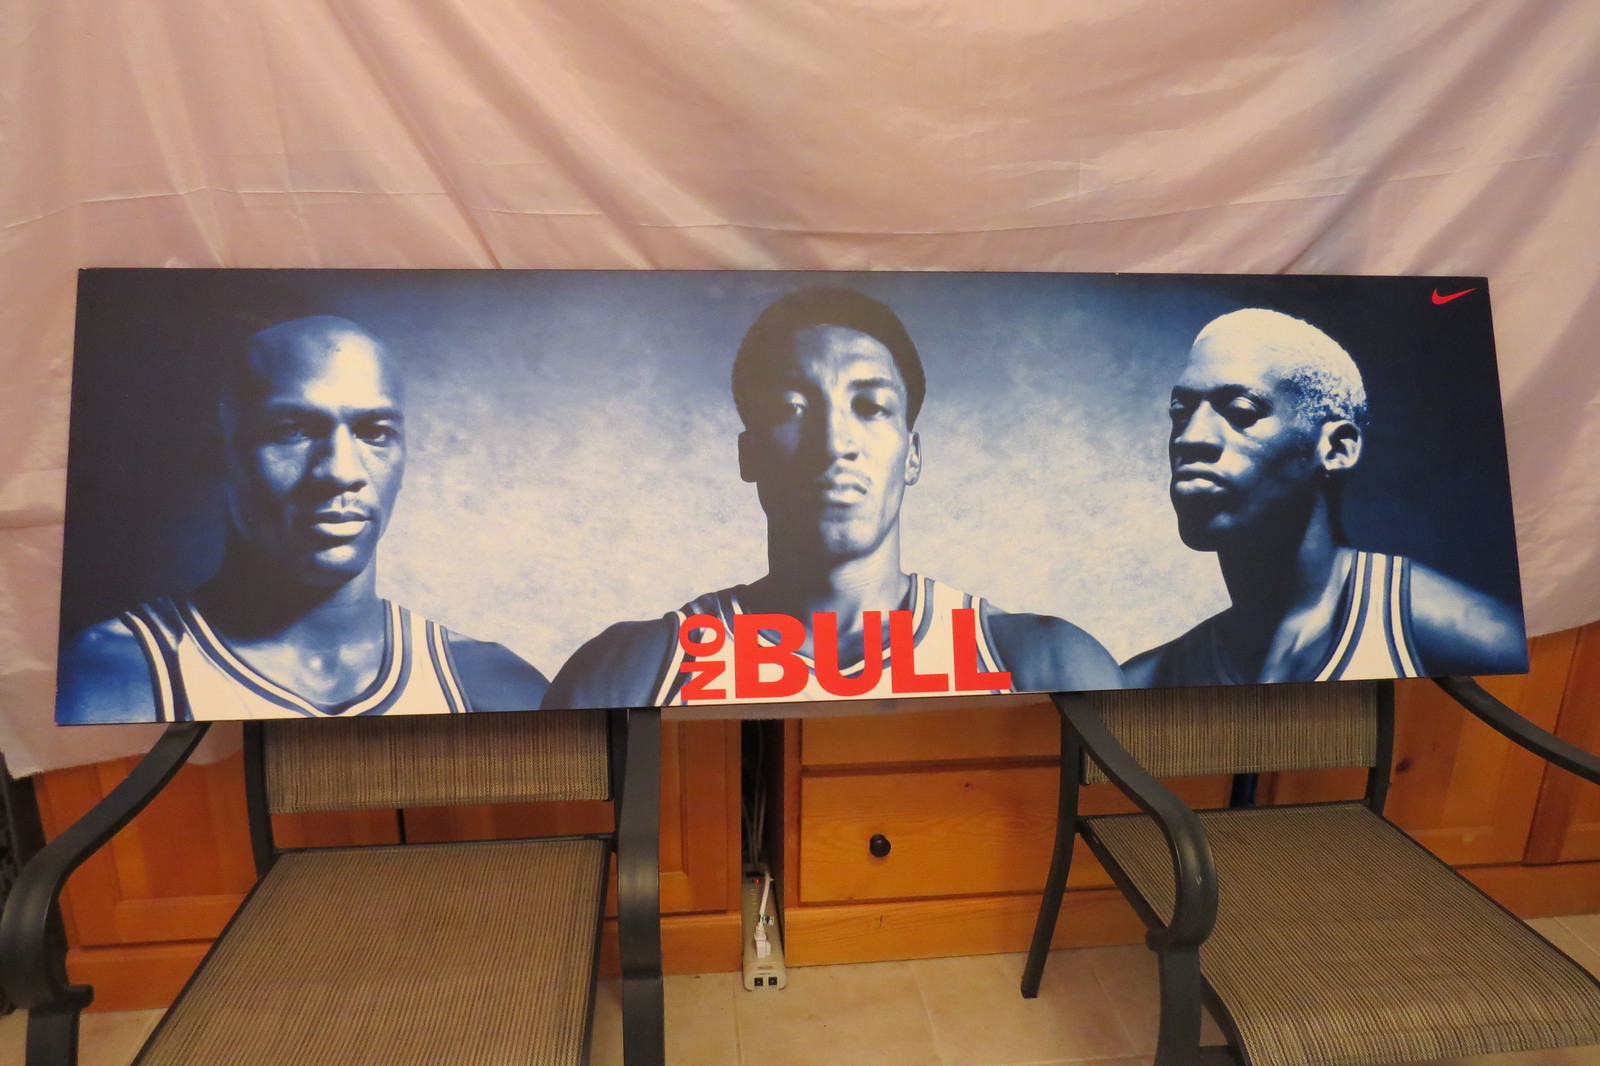 Chicago Bulls Poster-No Bull by Nike Jordan Pippen and Rodman -Mounted on Board  - $550.00